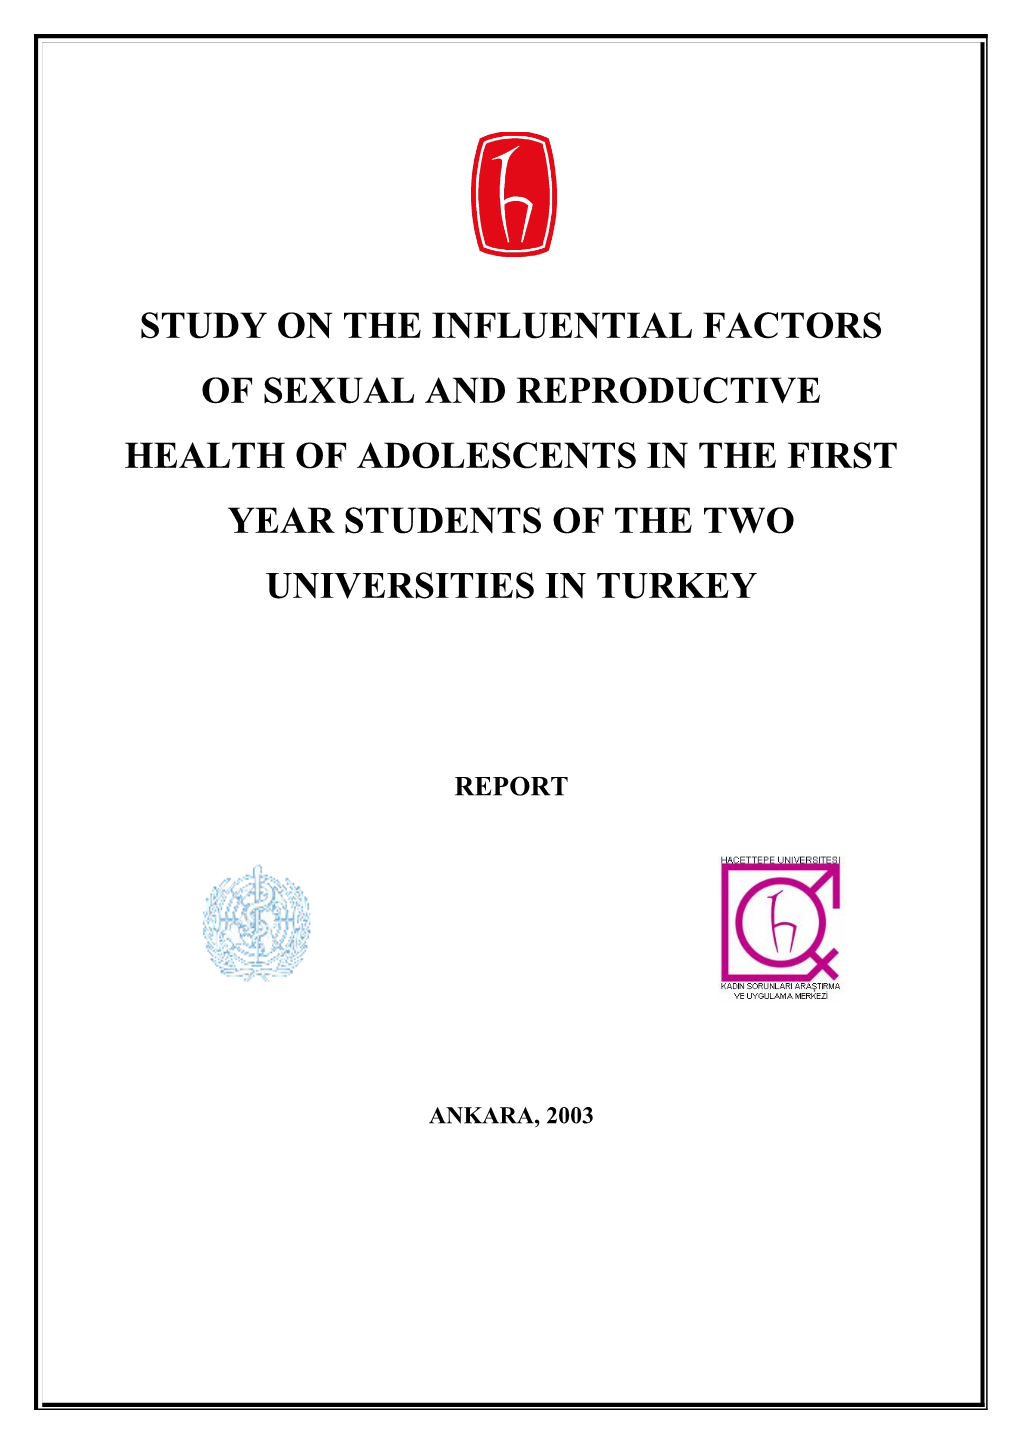 Study on the and Influential Factors of Sexual and Reproductive Health of Adolescents In